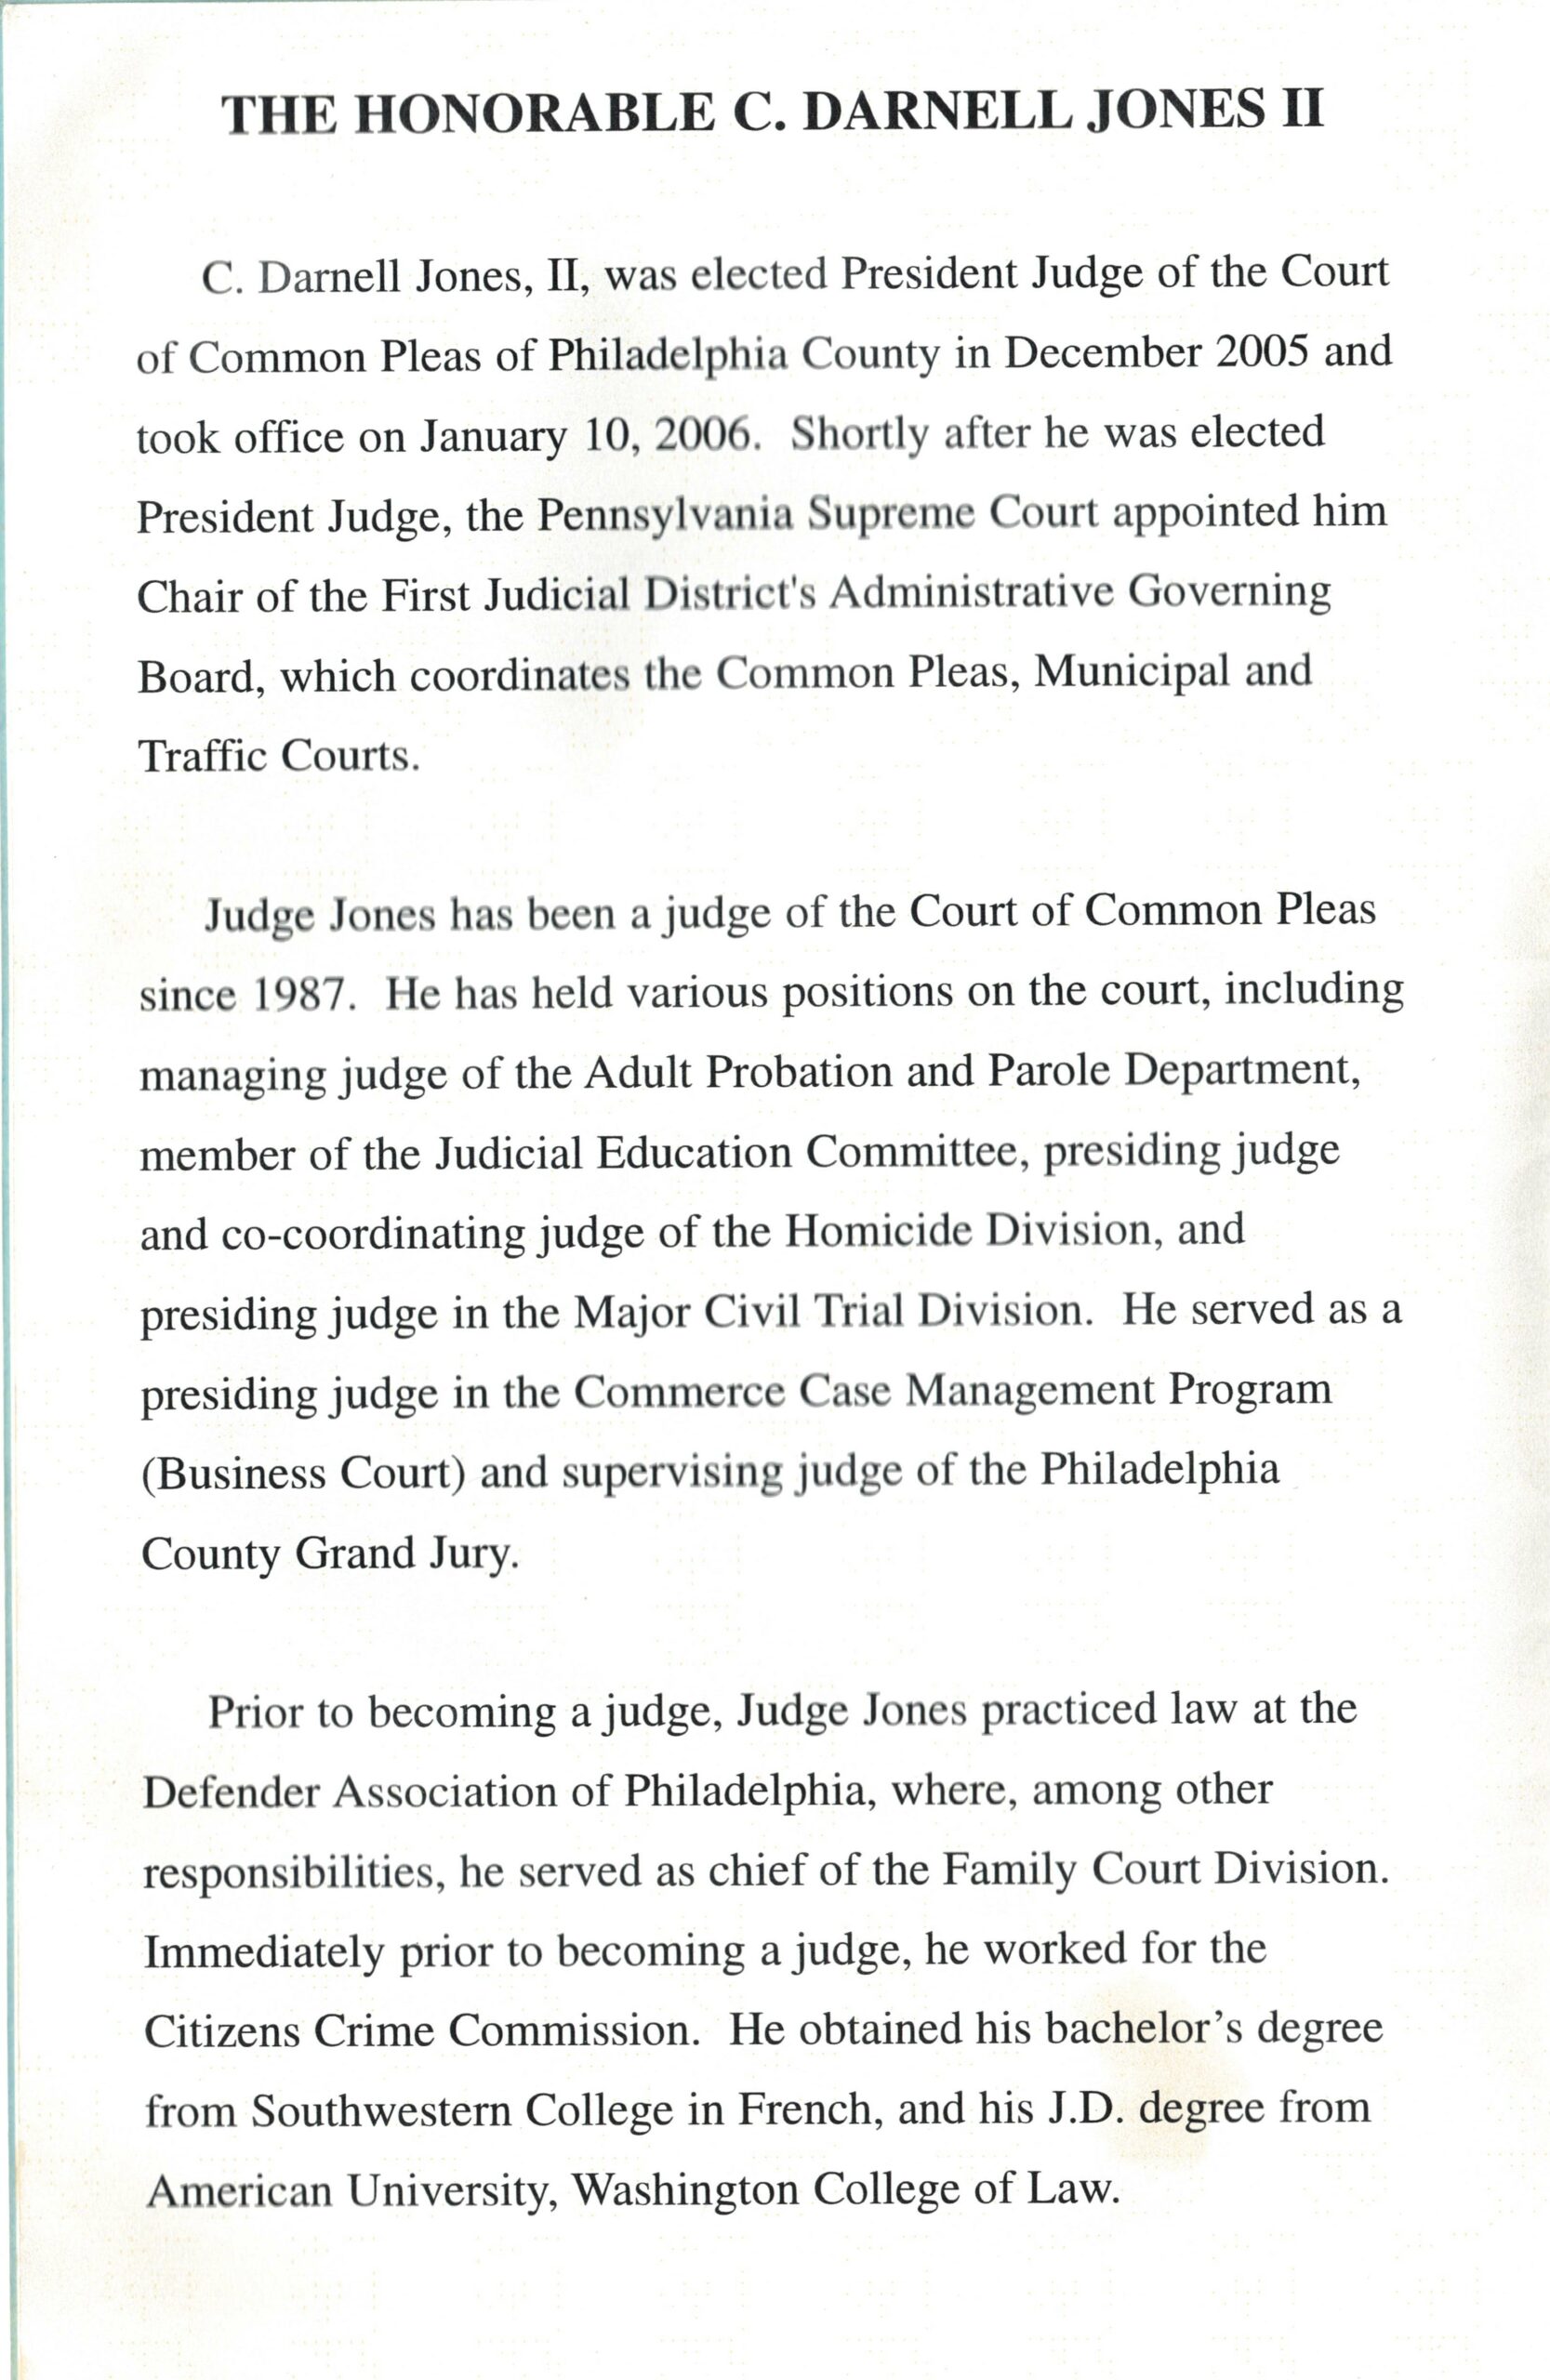 Sixth page of the Jones program pamphlet with biography text.